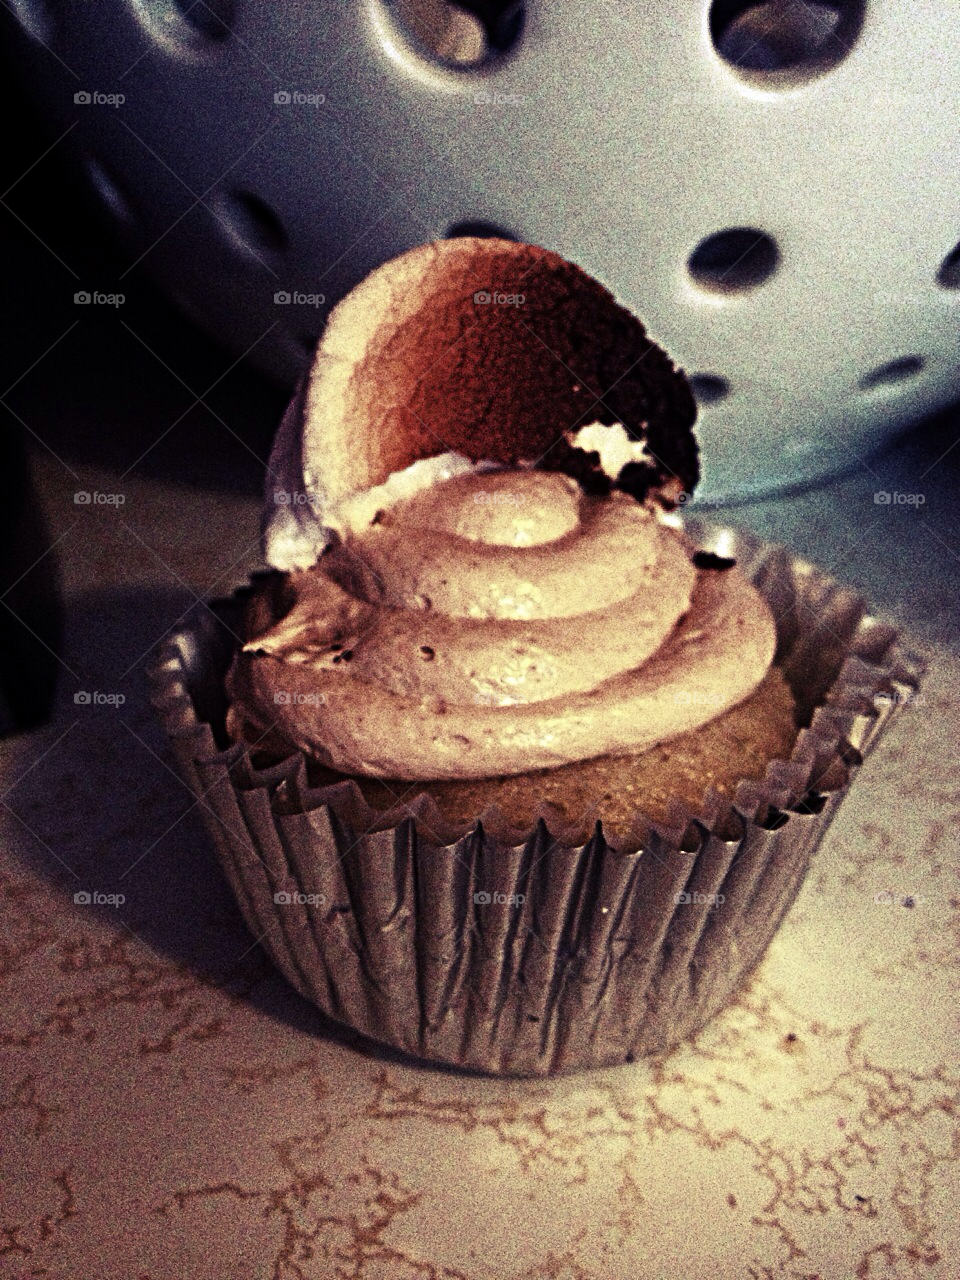 food cupcake toasted gourmet by thepokerwife